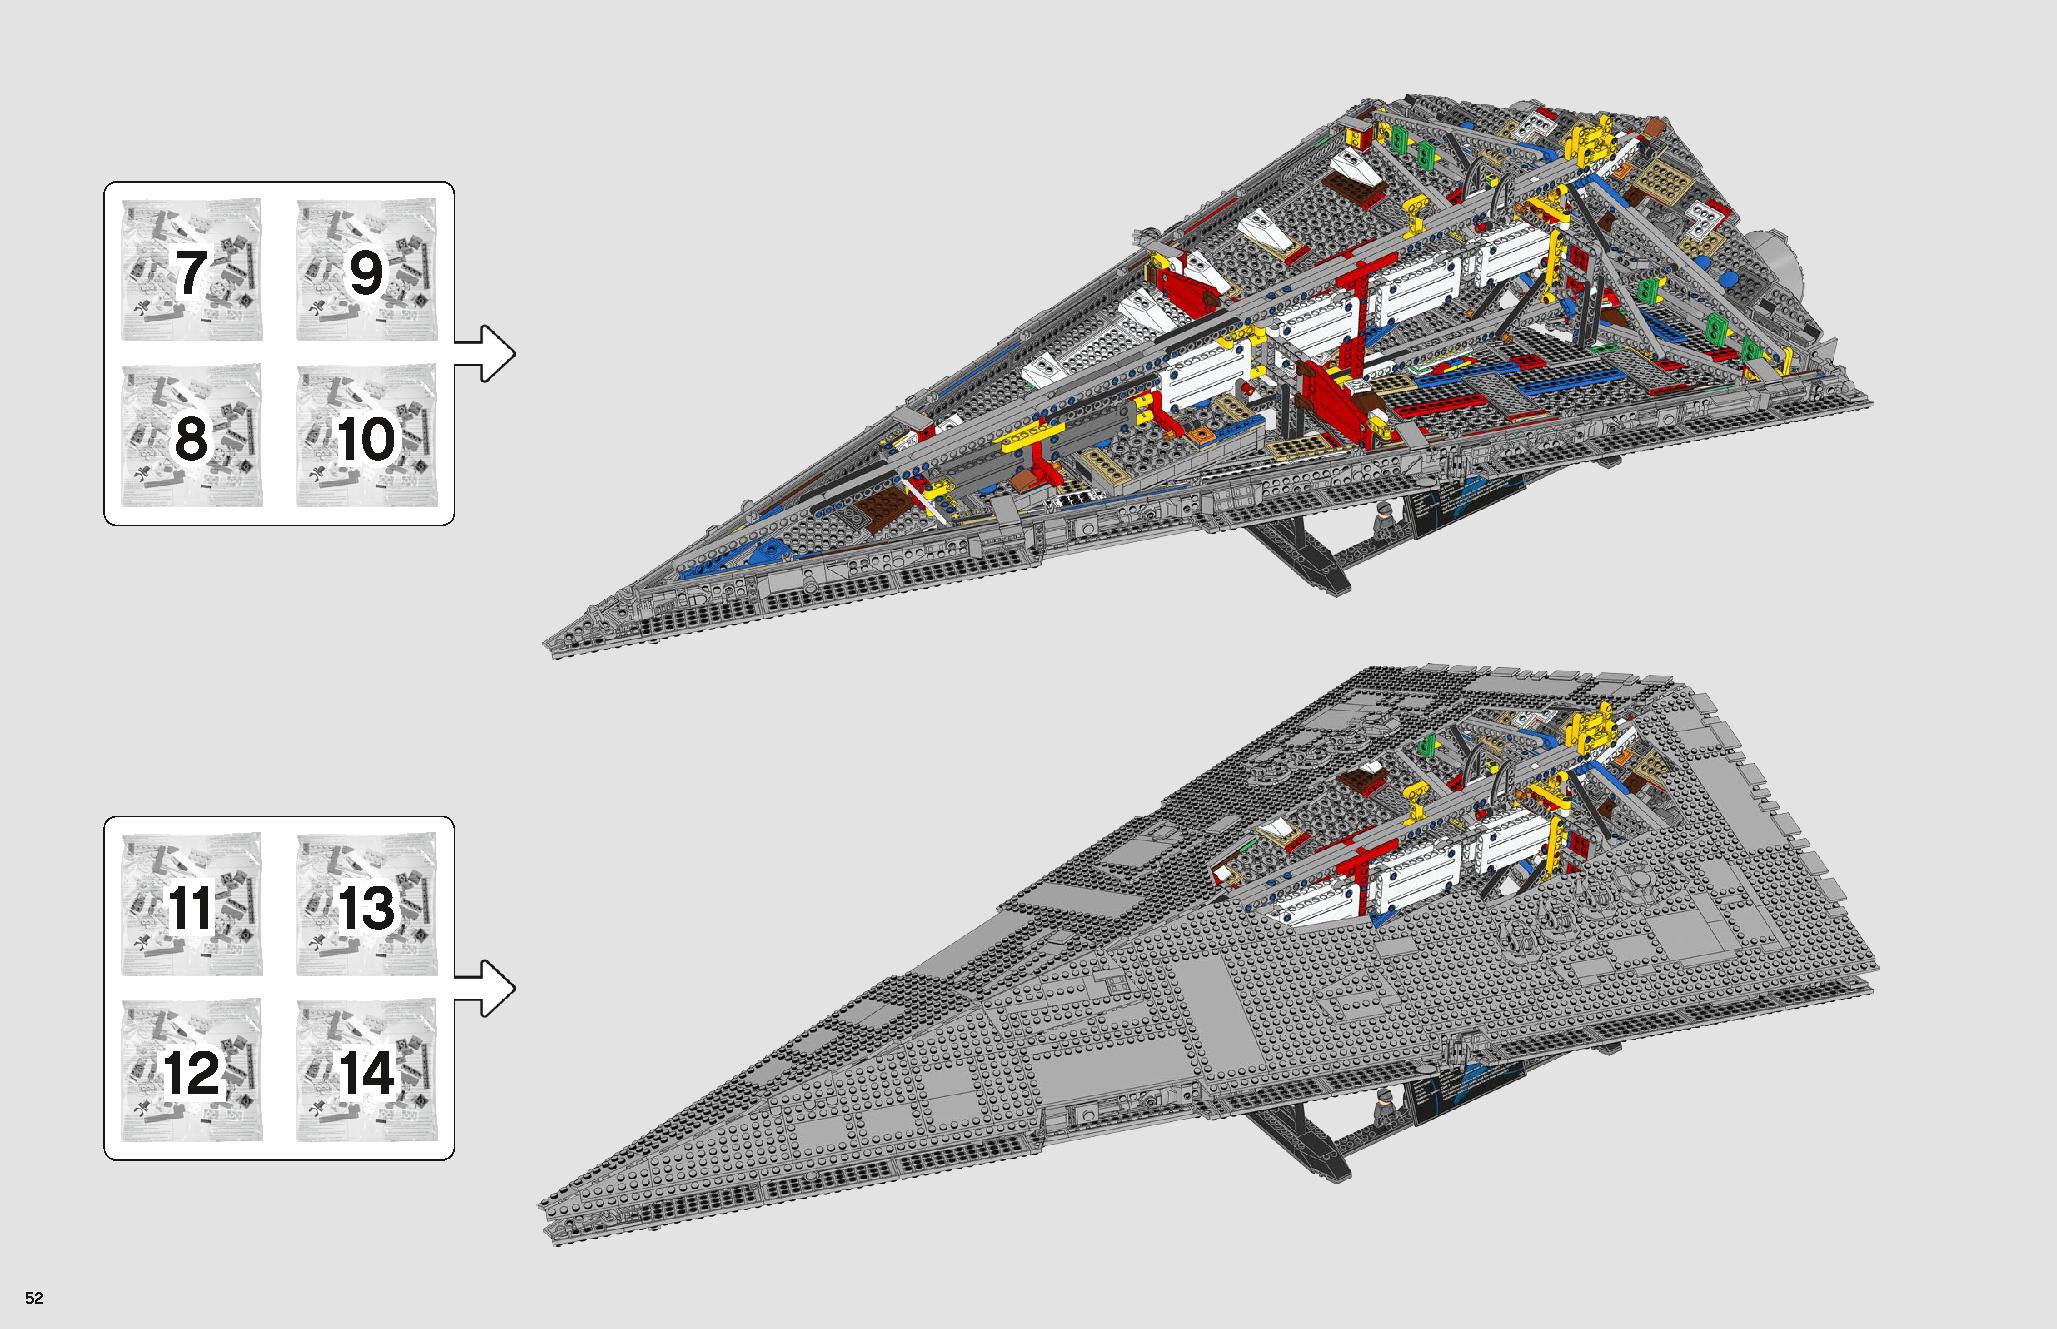 Imperial Star Destroyer 75252 レゴの商品情報 レゴの説明書・組立方法 52 page